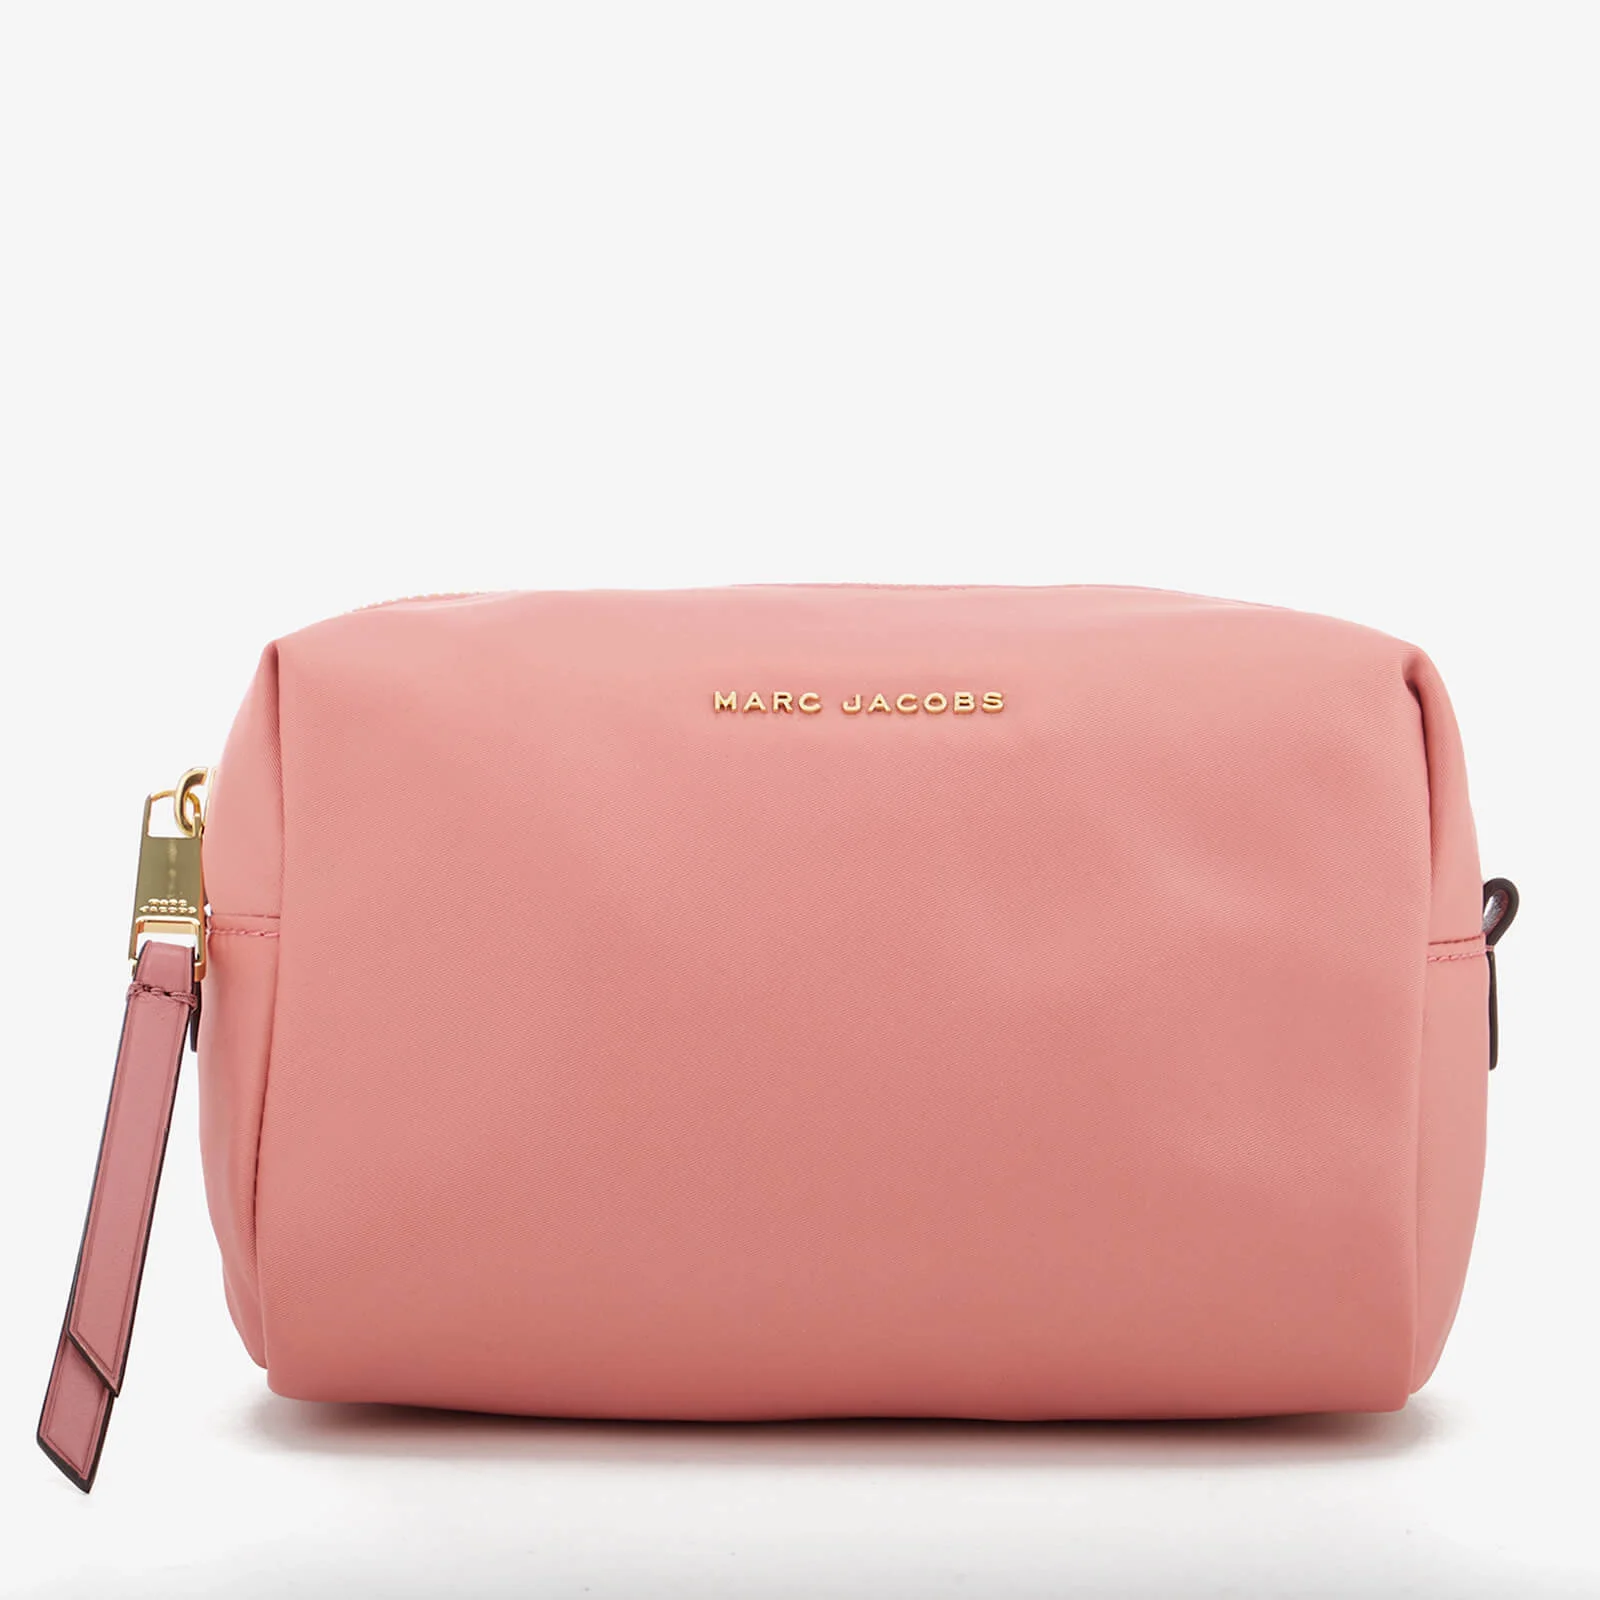 Marc Jacobs Women's Large Cosmetic Bag - Canyan Pink Image 1